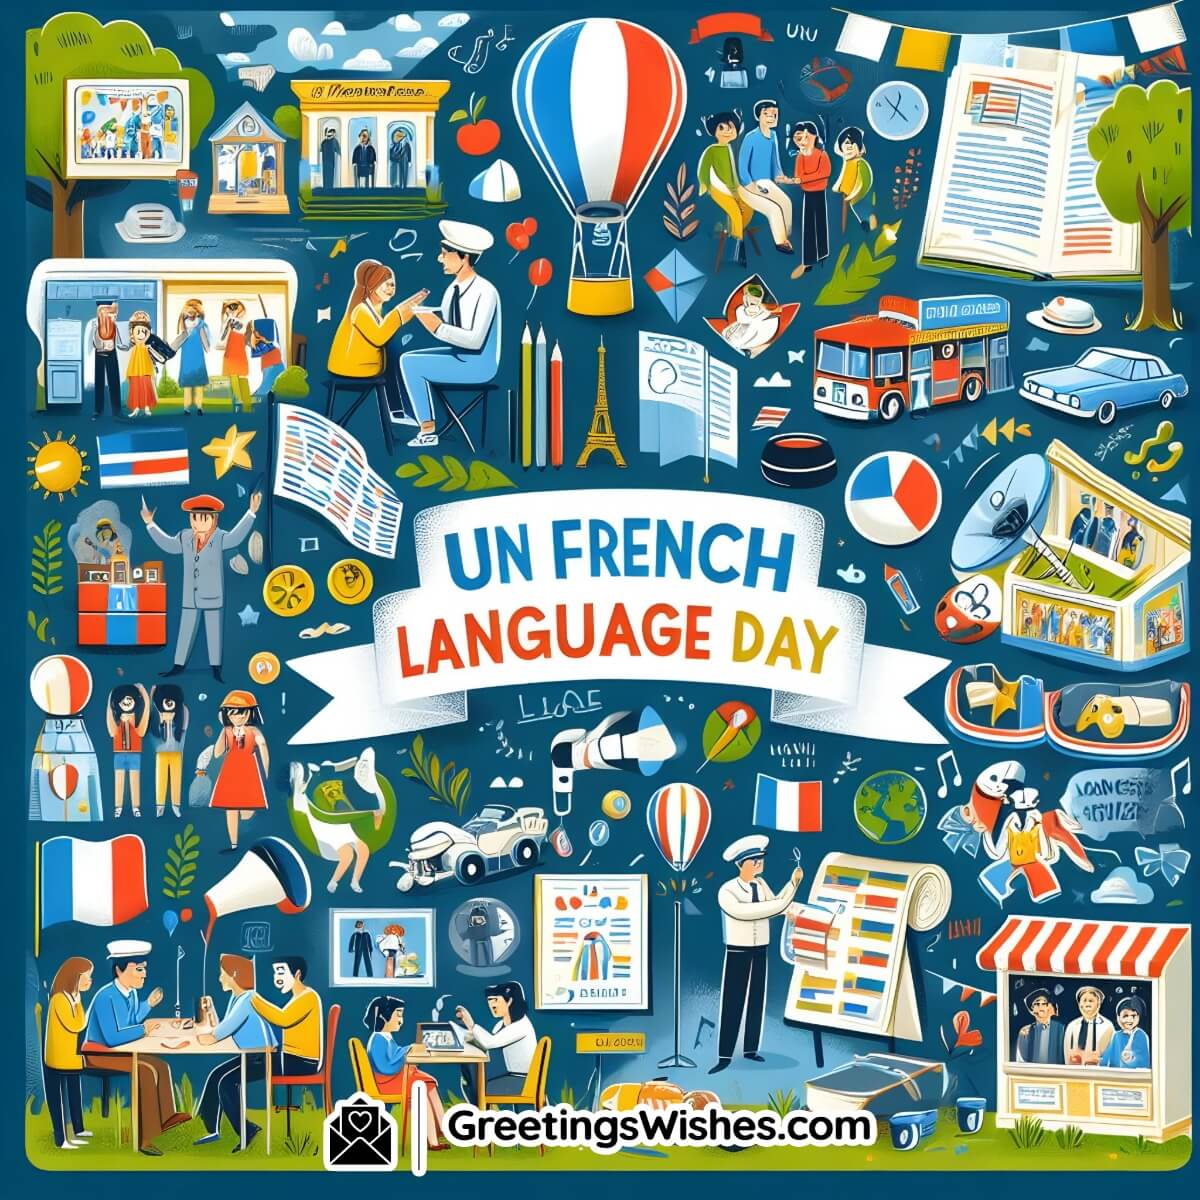 Activities For Un French Language Day